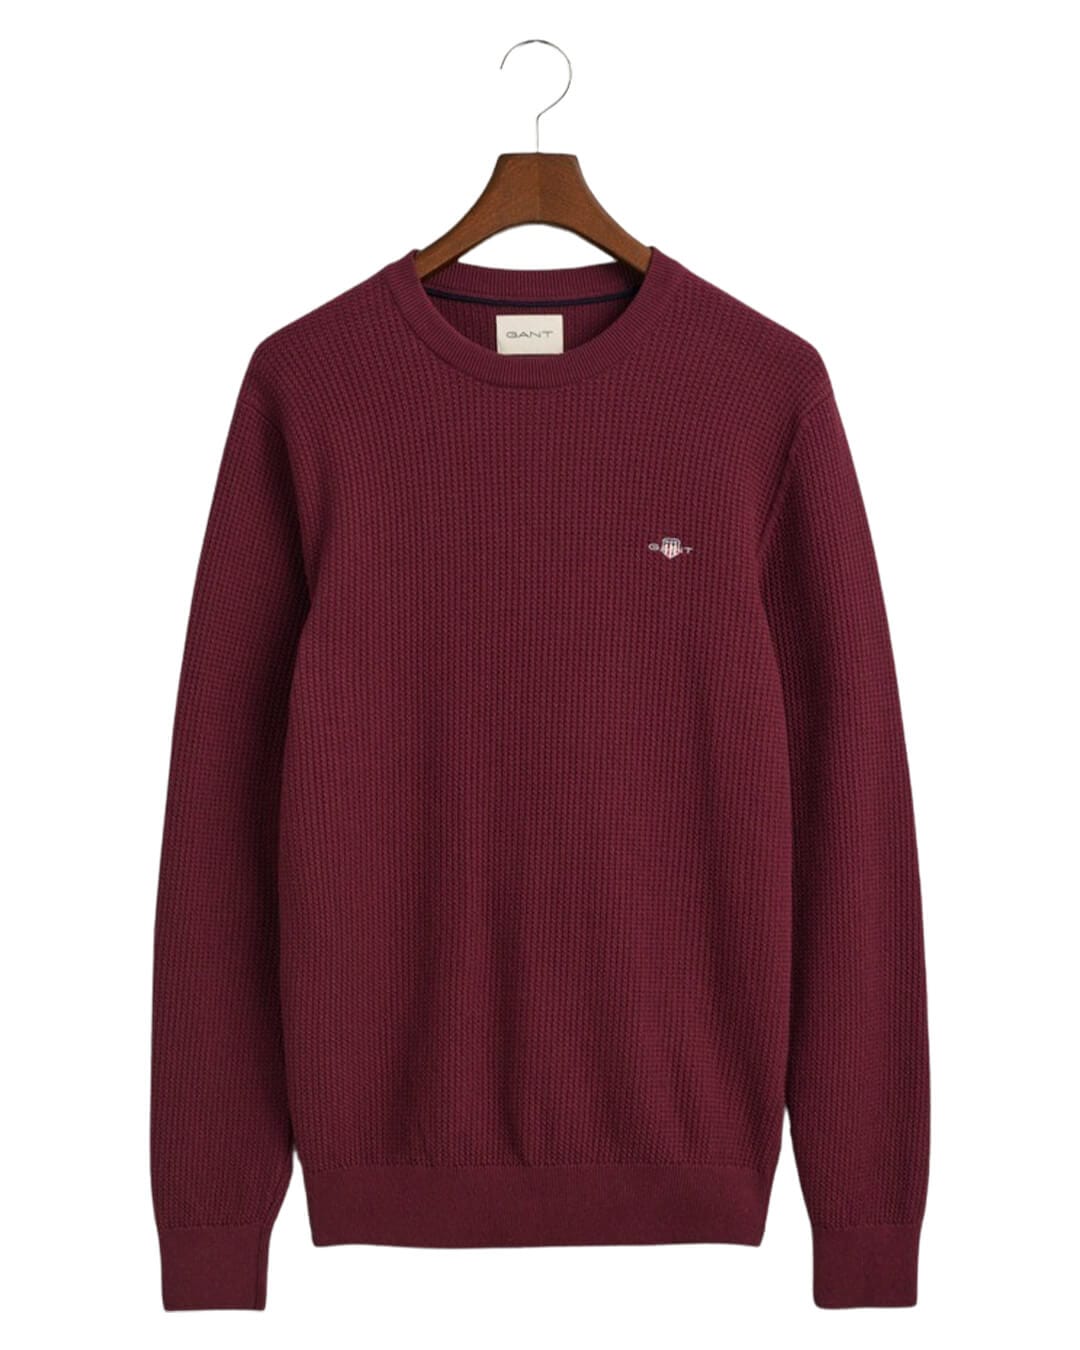 Gant Jumpers Gant Red Shadow Micro Cotton Textured Crew Neck Sweater